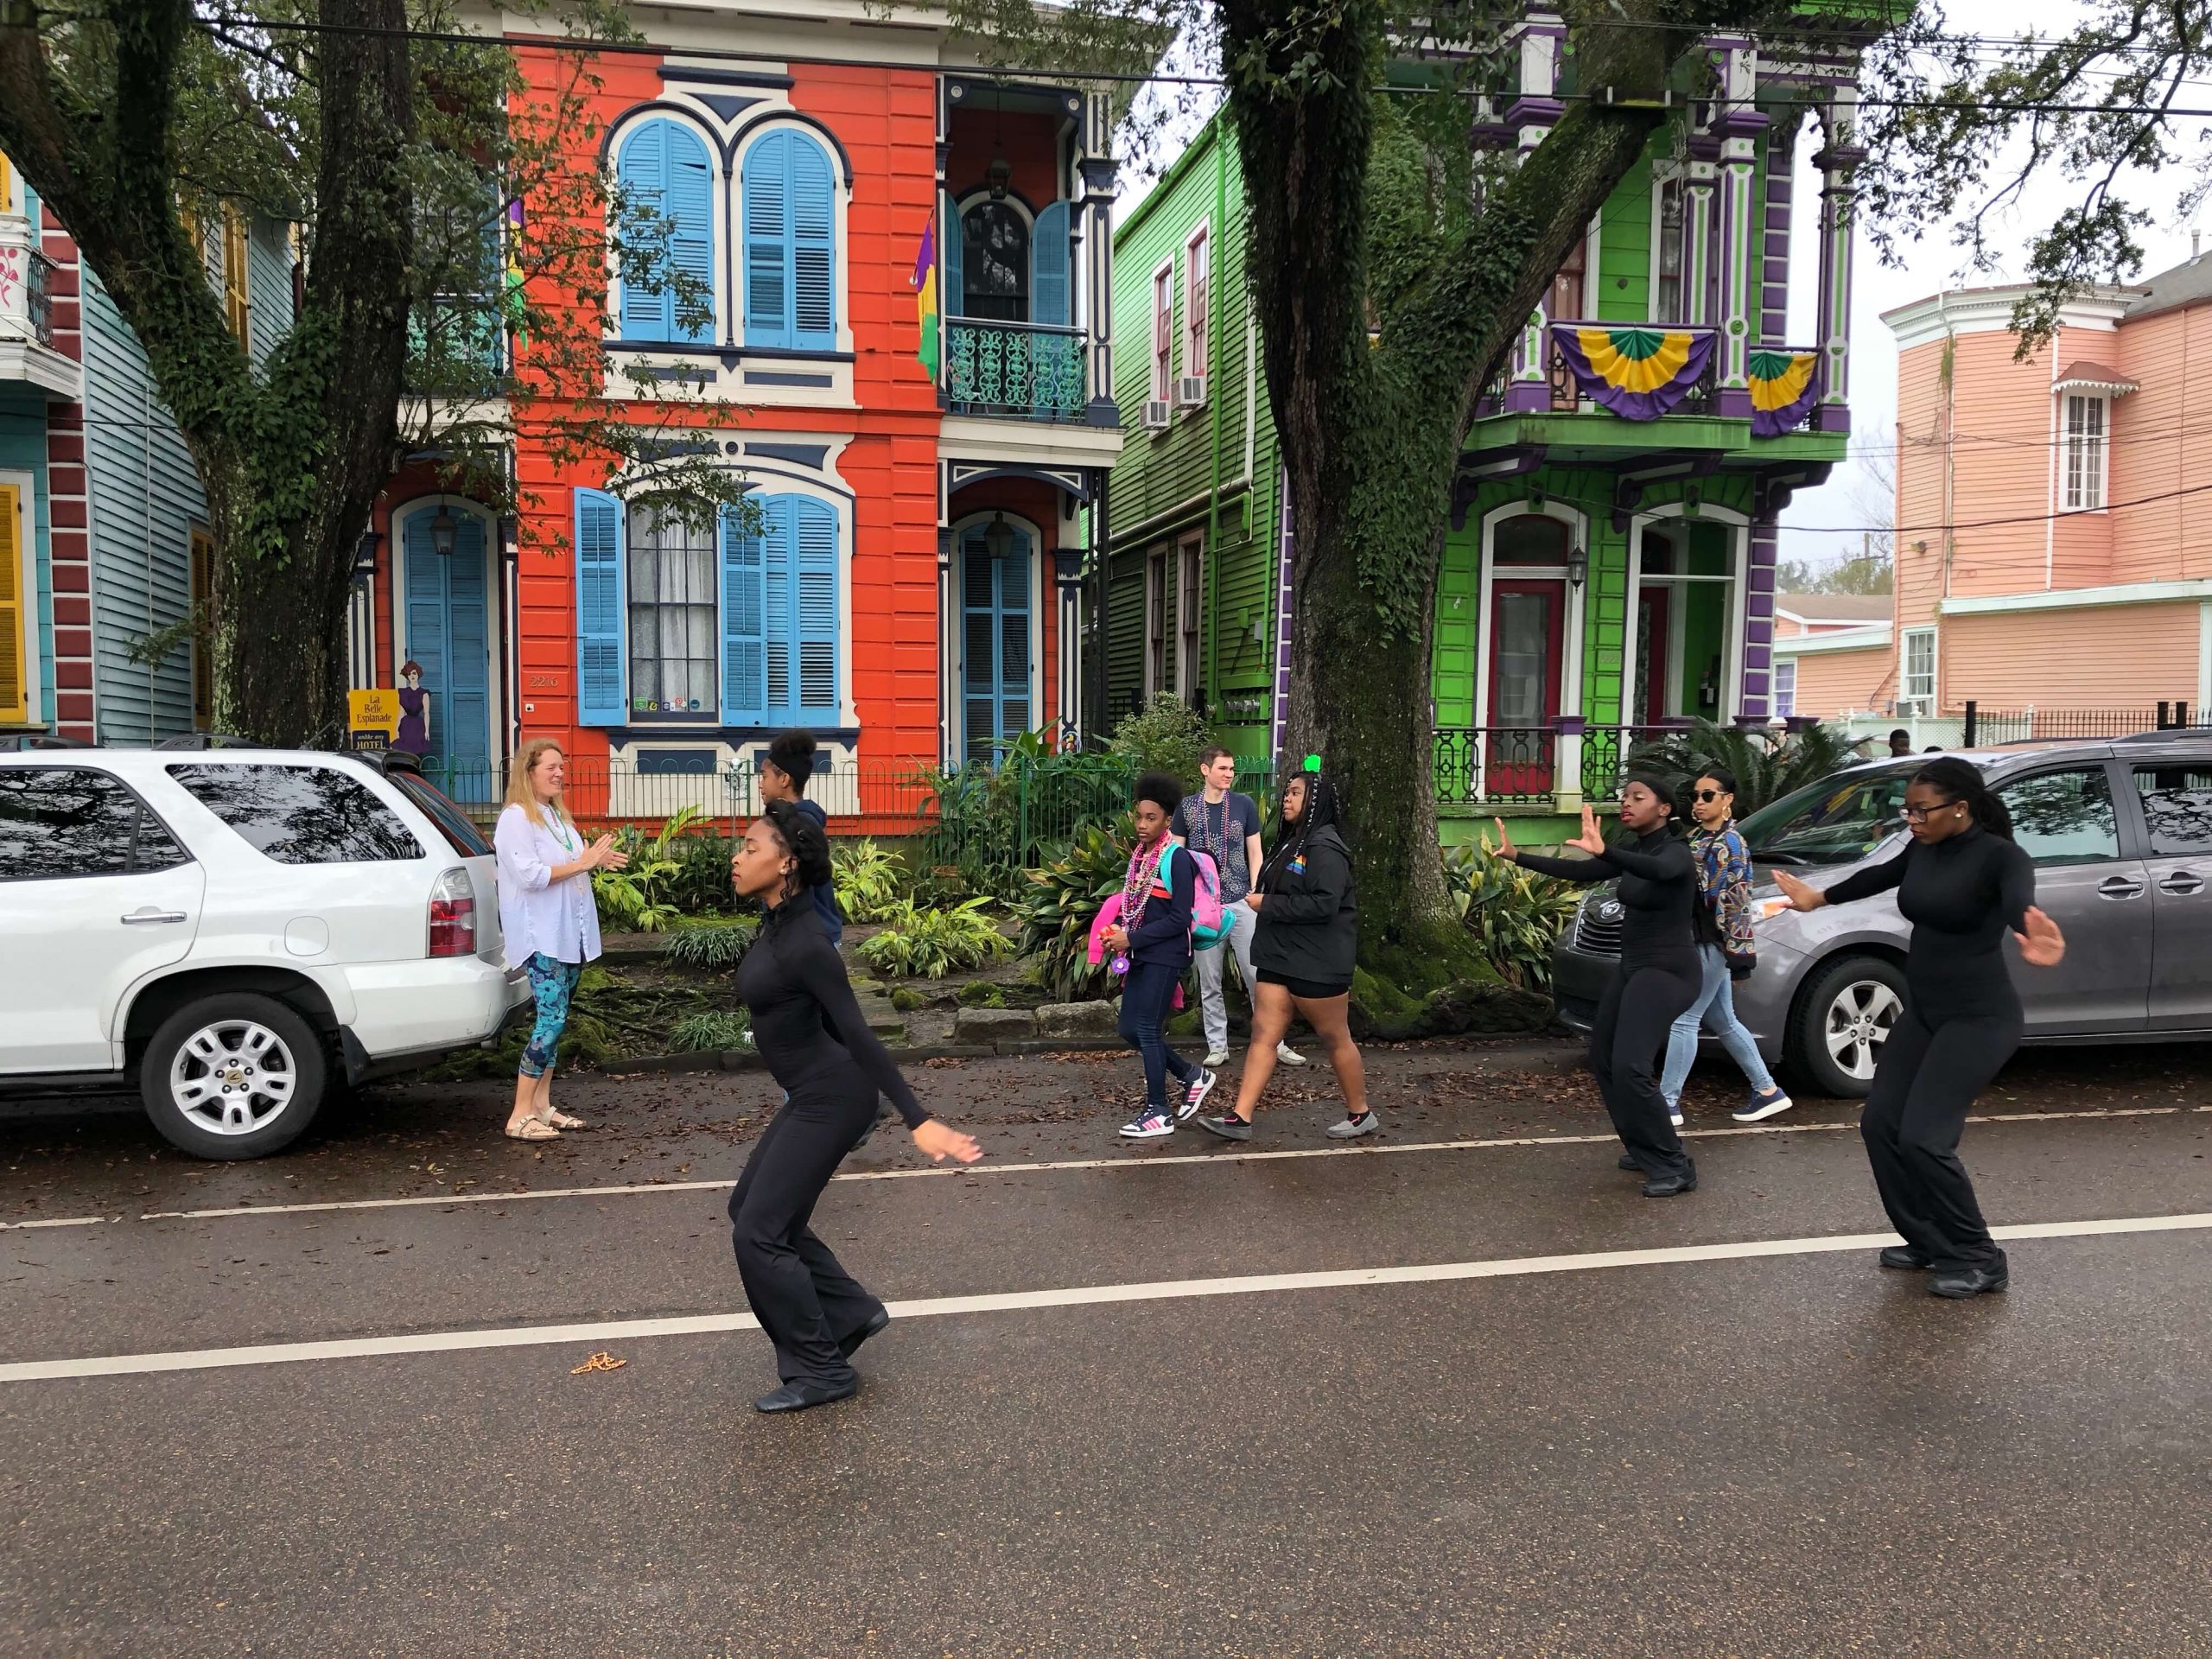 Real New Orleans Mardi Gras